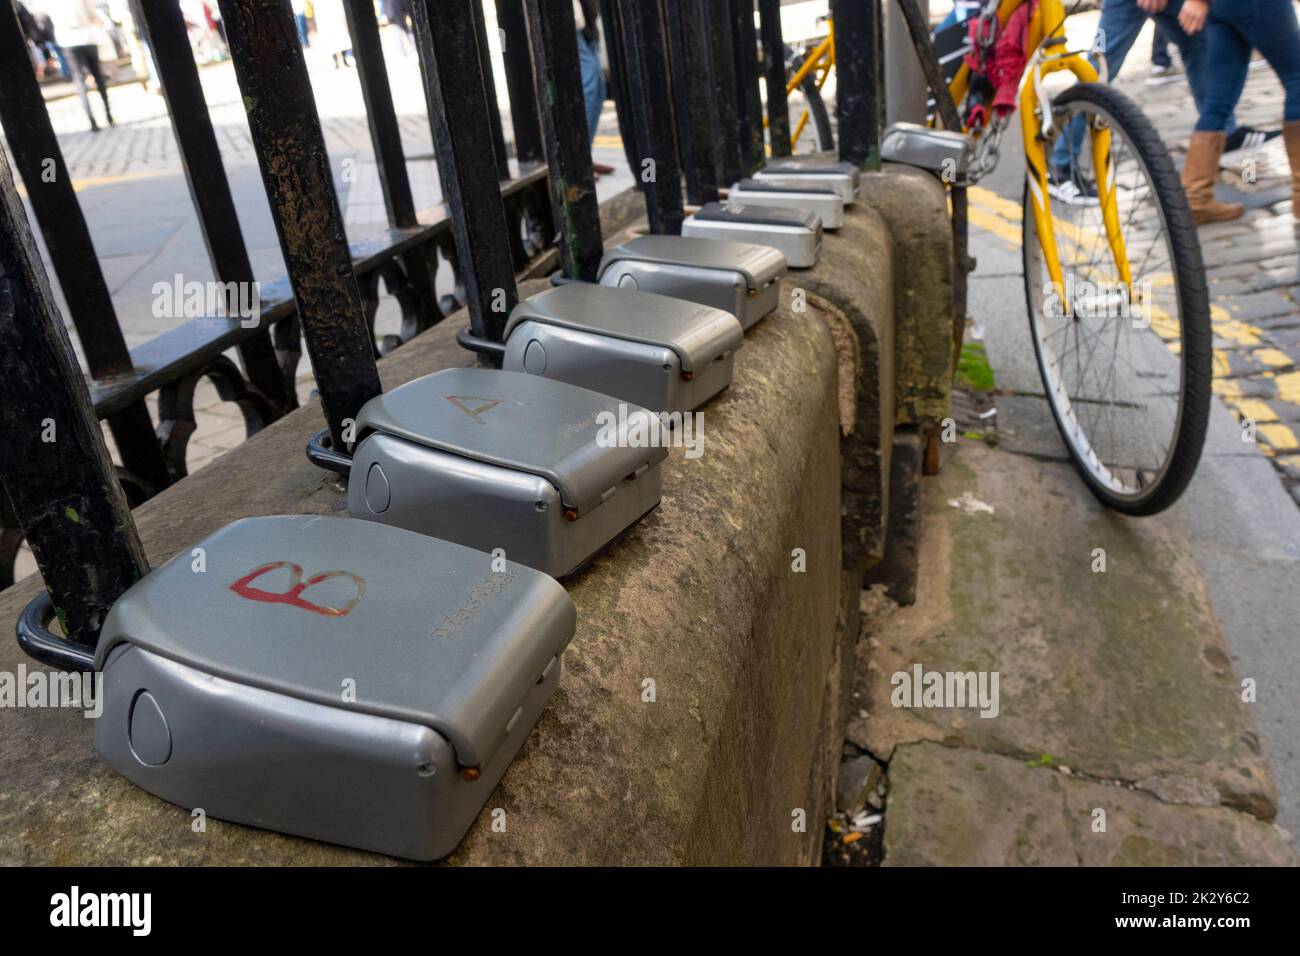 Many key safes for Airbnb  short term lets outside apartment building in Edinburgh Old Town, Scotland UK Stock Photo